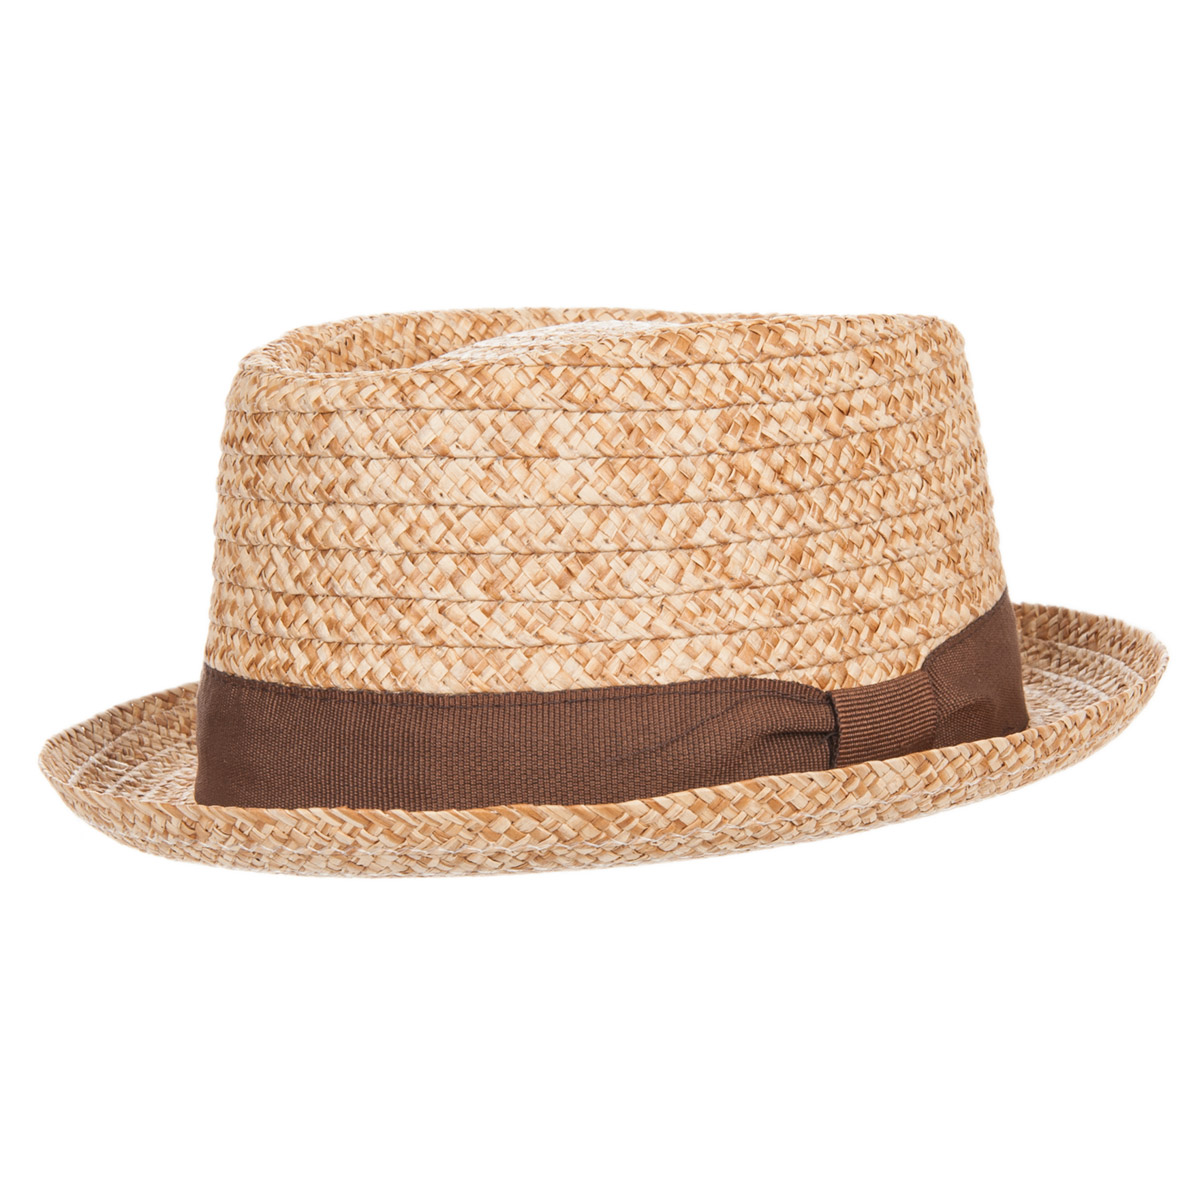 COLOUR NATURAL SUMMER STRAW PORK PIE PARTY BARBECUE HAT 